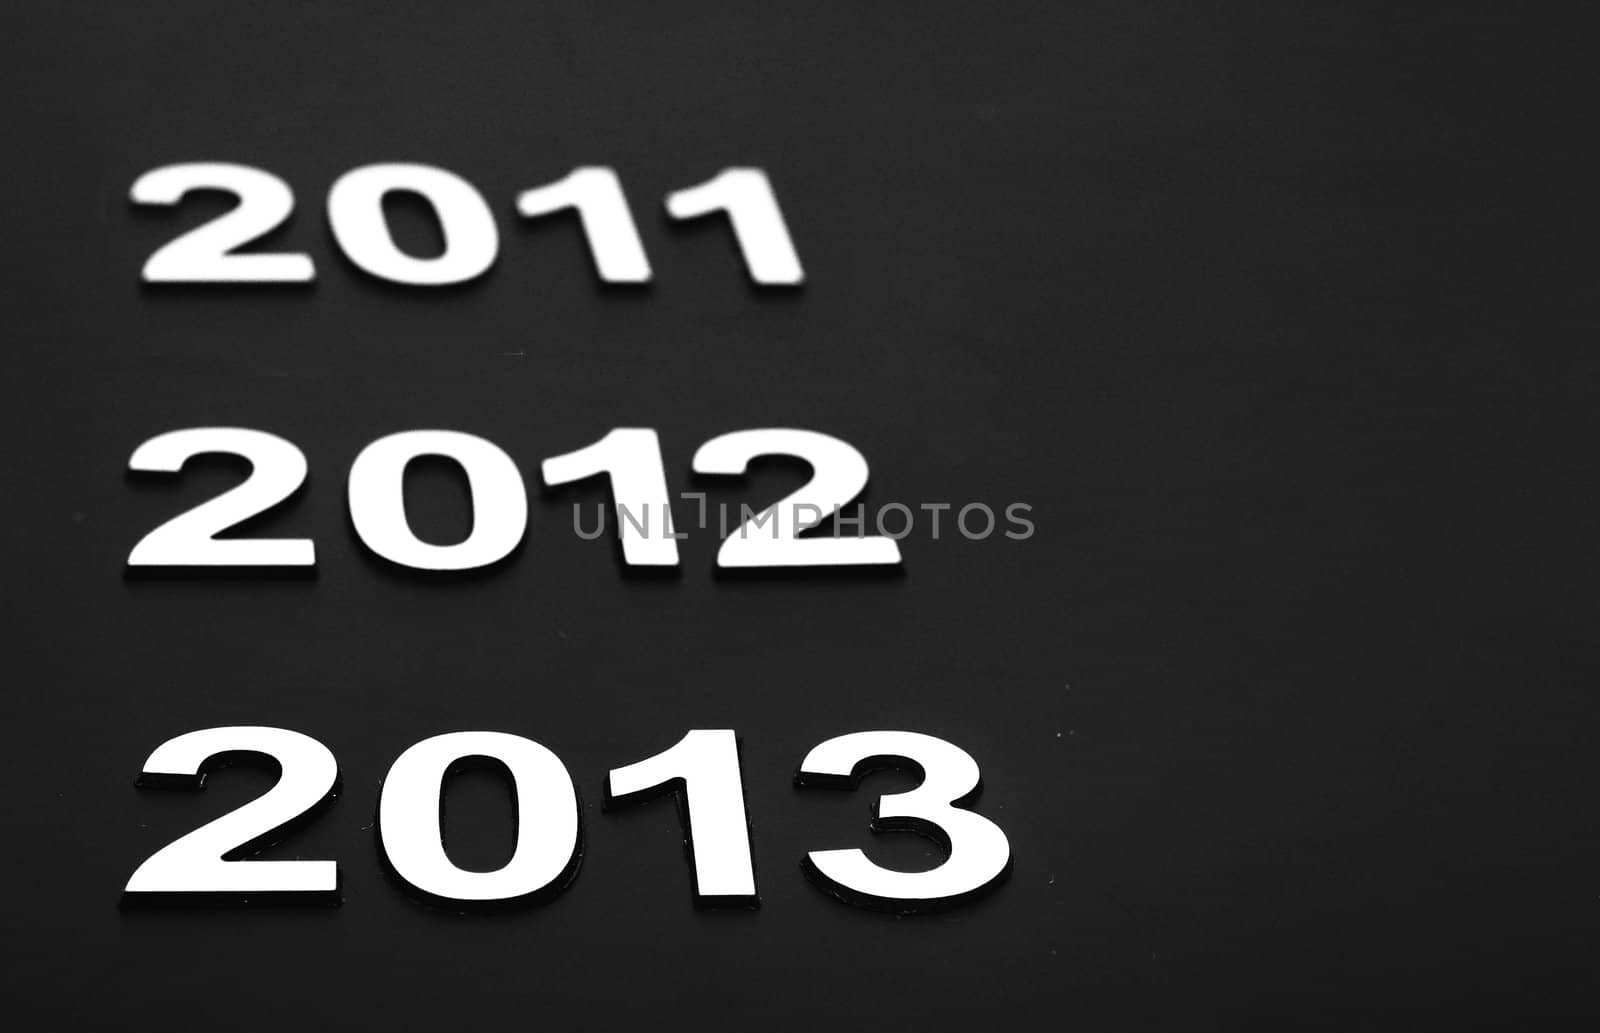 Upcoming years 2011, 2012 and 2013 as chrome digits over black background 